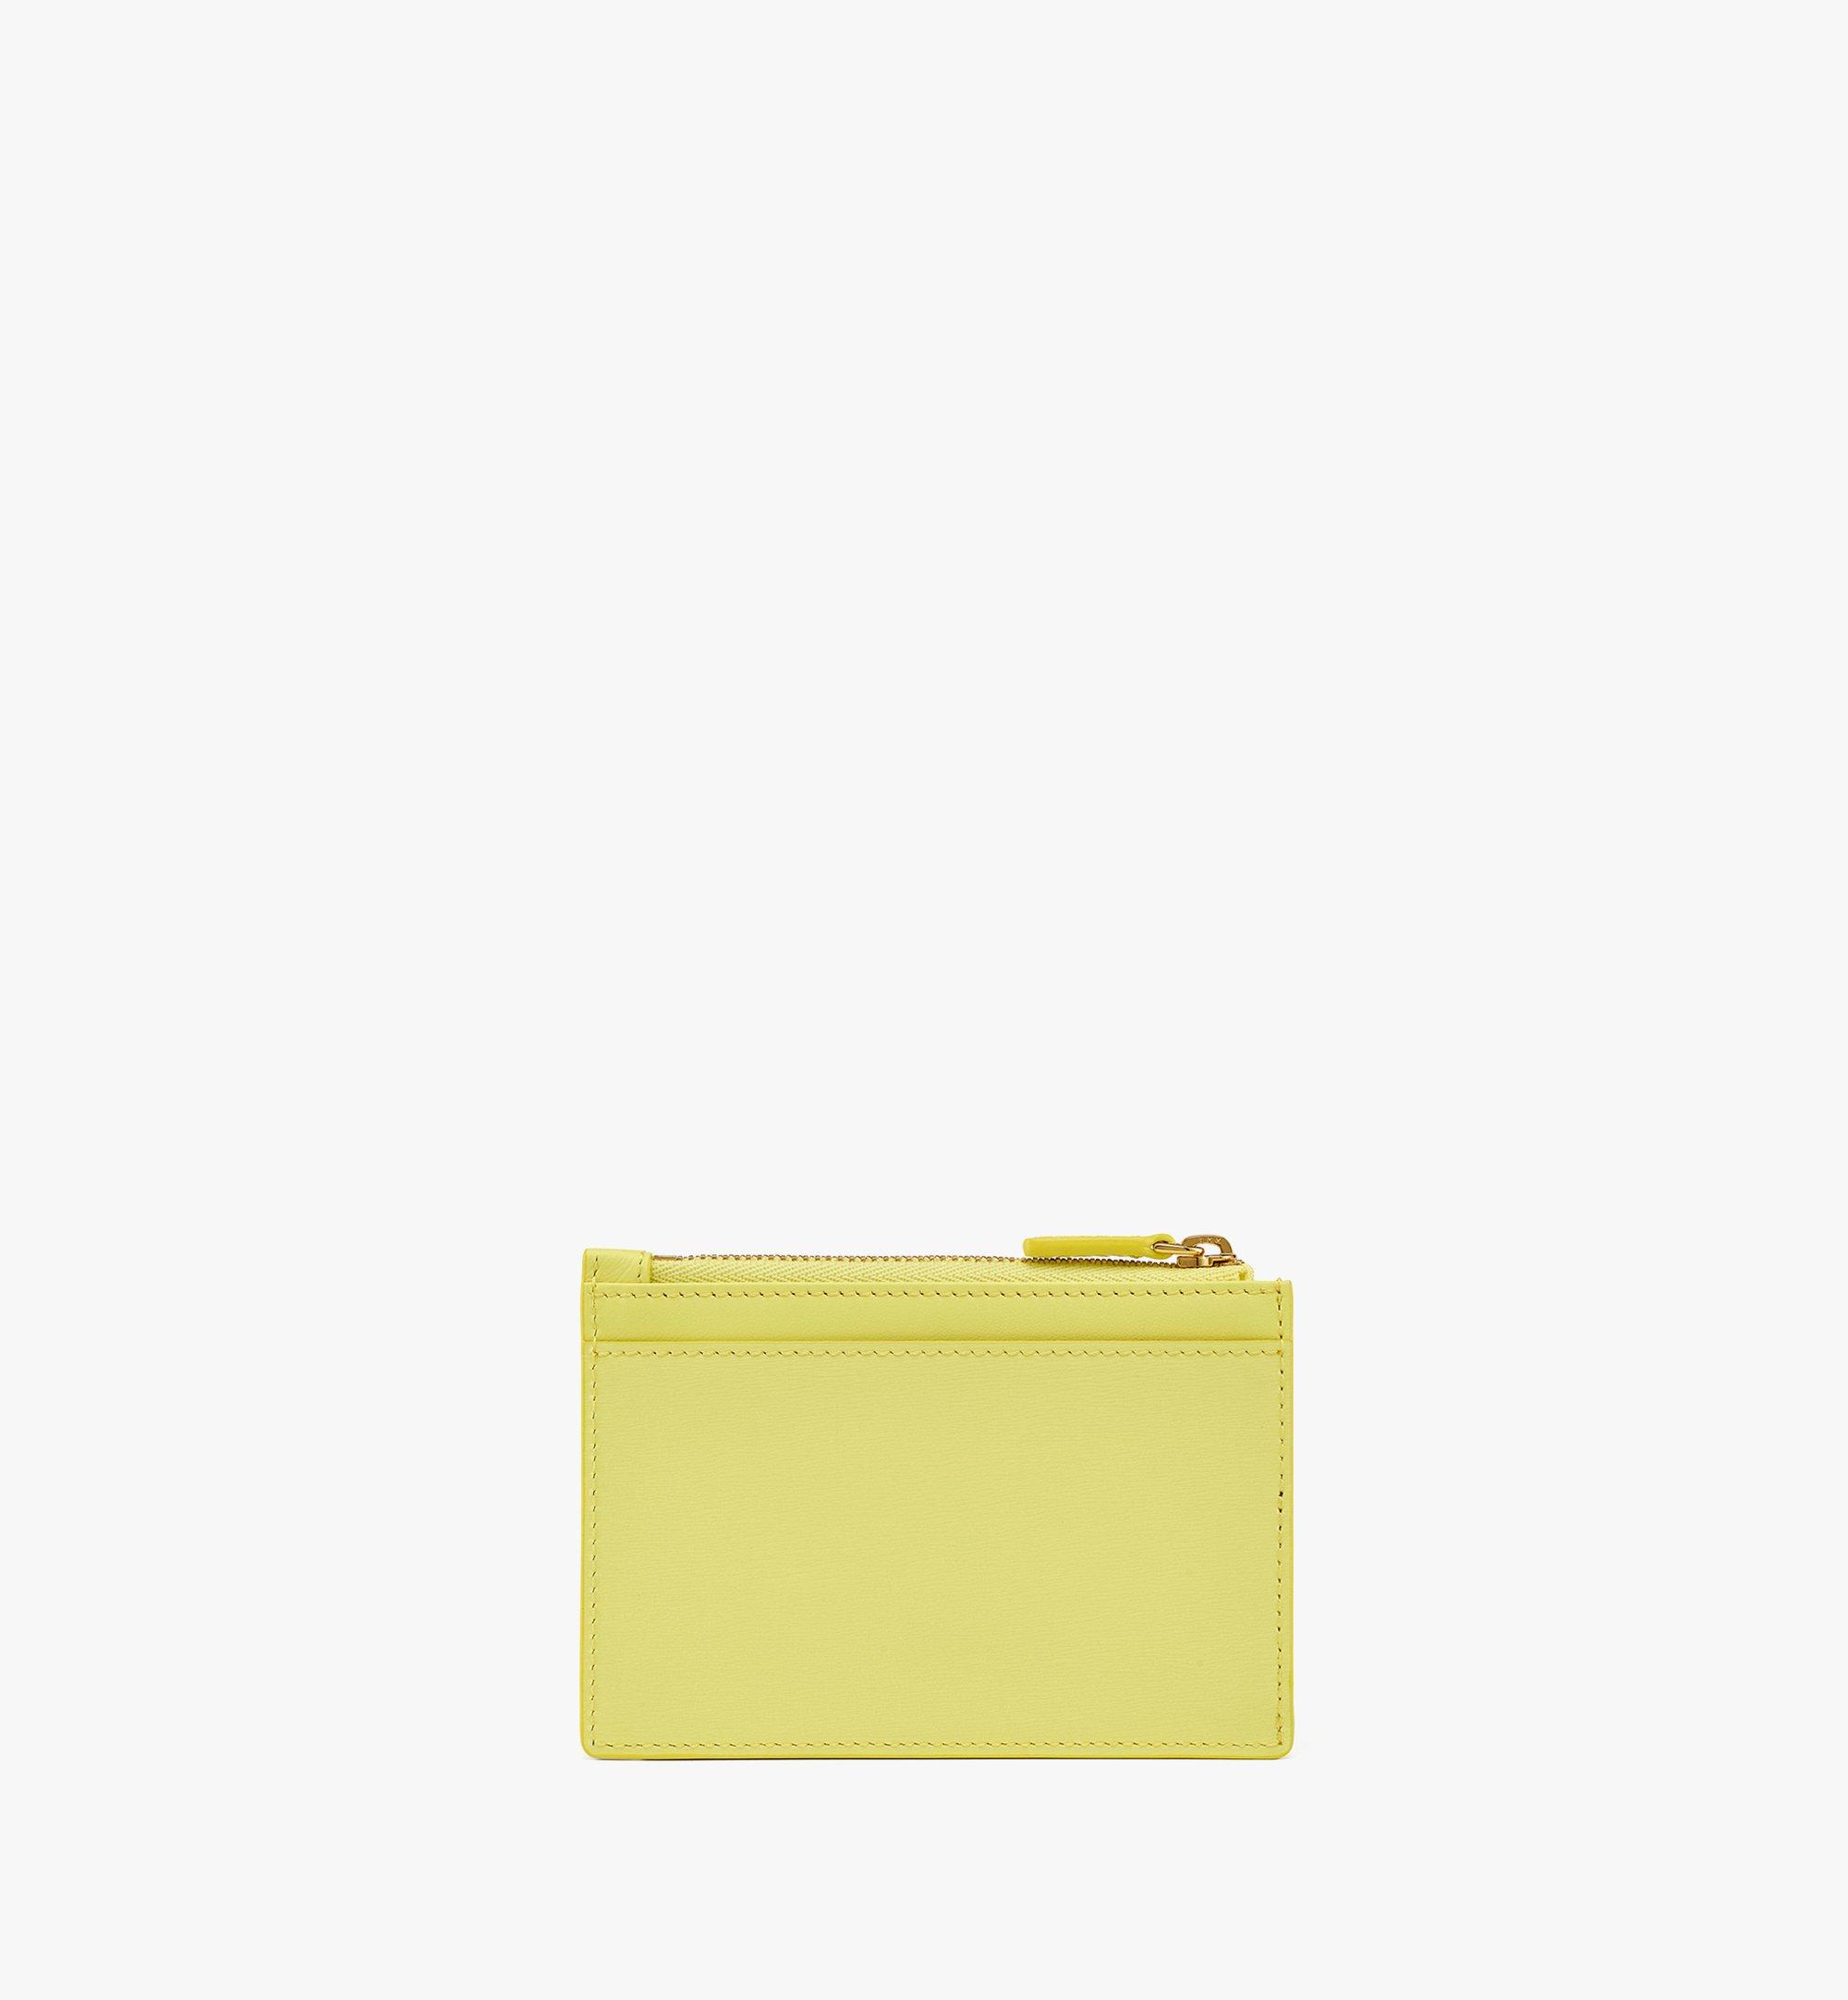 MCM Patricia Card Case in Spanish Leather Yellow MYACSPA02Y4001 Alternate View 2